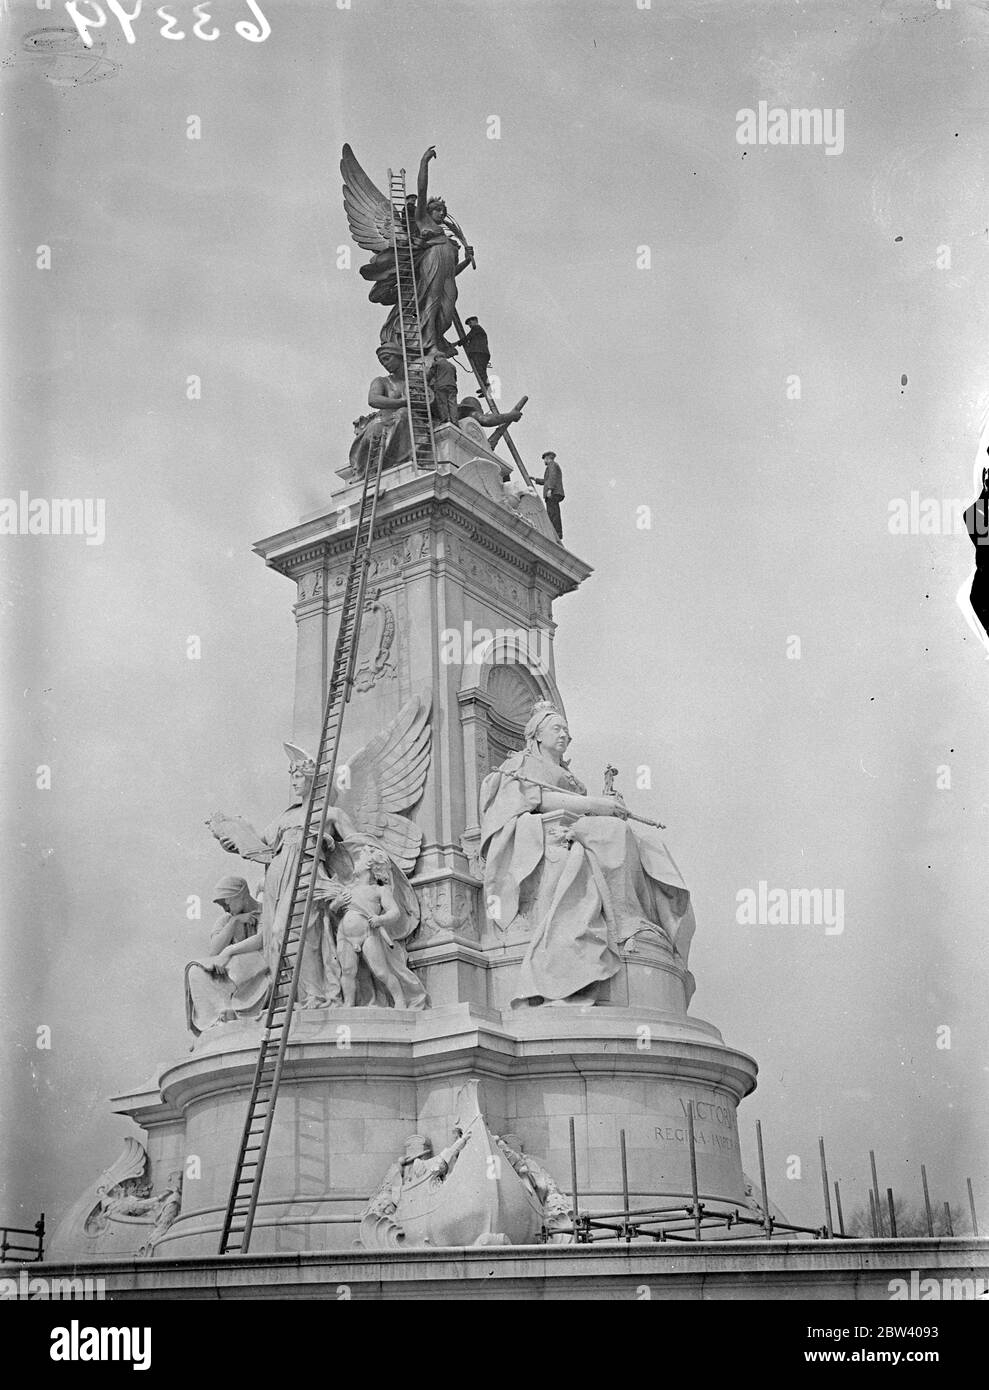 Victoria Memorial being cleaned for Coronation . The Victoria Memorial outside Buckingham Palace is being cleaned in preparation for the Coronation . Photo shows cleaning the Victoria Memorial . 12 April 1937 Stock Photo